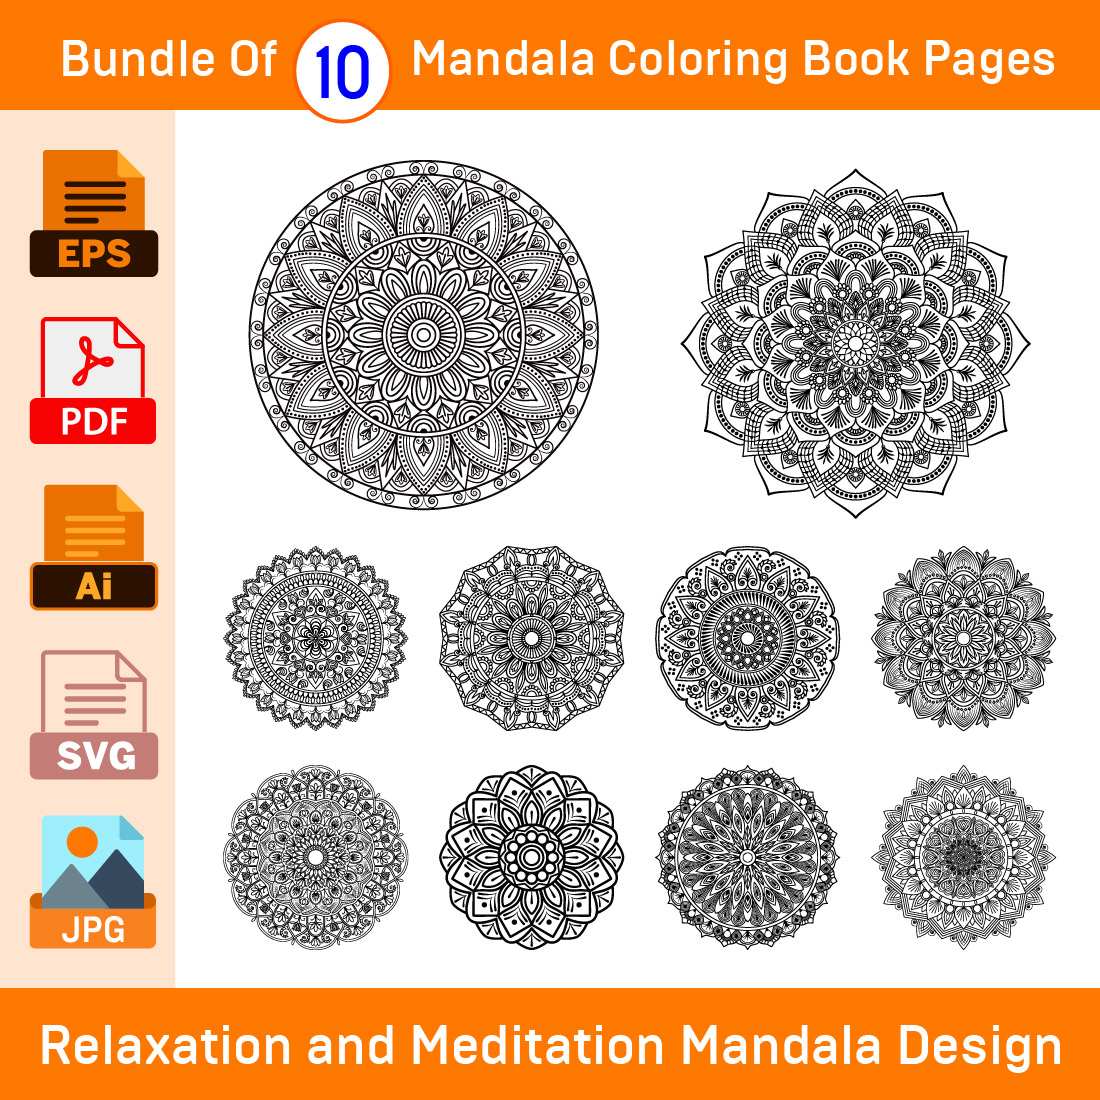 Bundle of 10 Relaxation and Meditation Mandala Coloring Book Pages cover image.